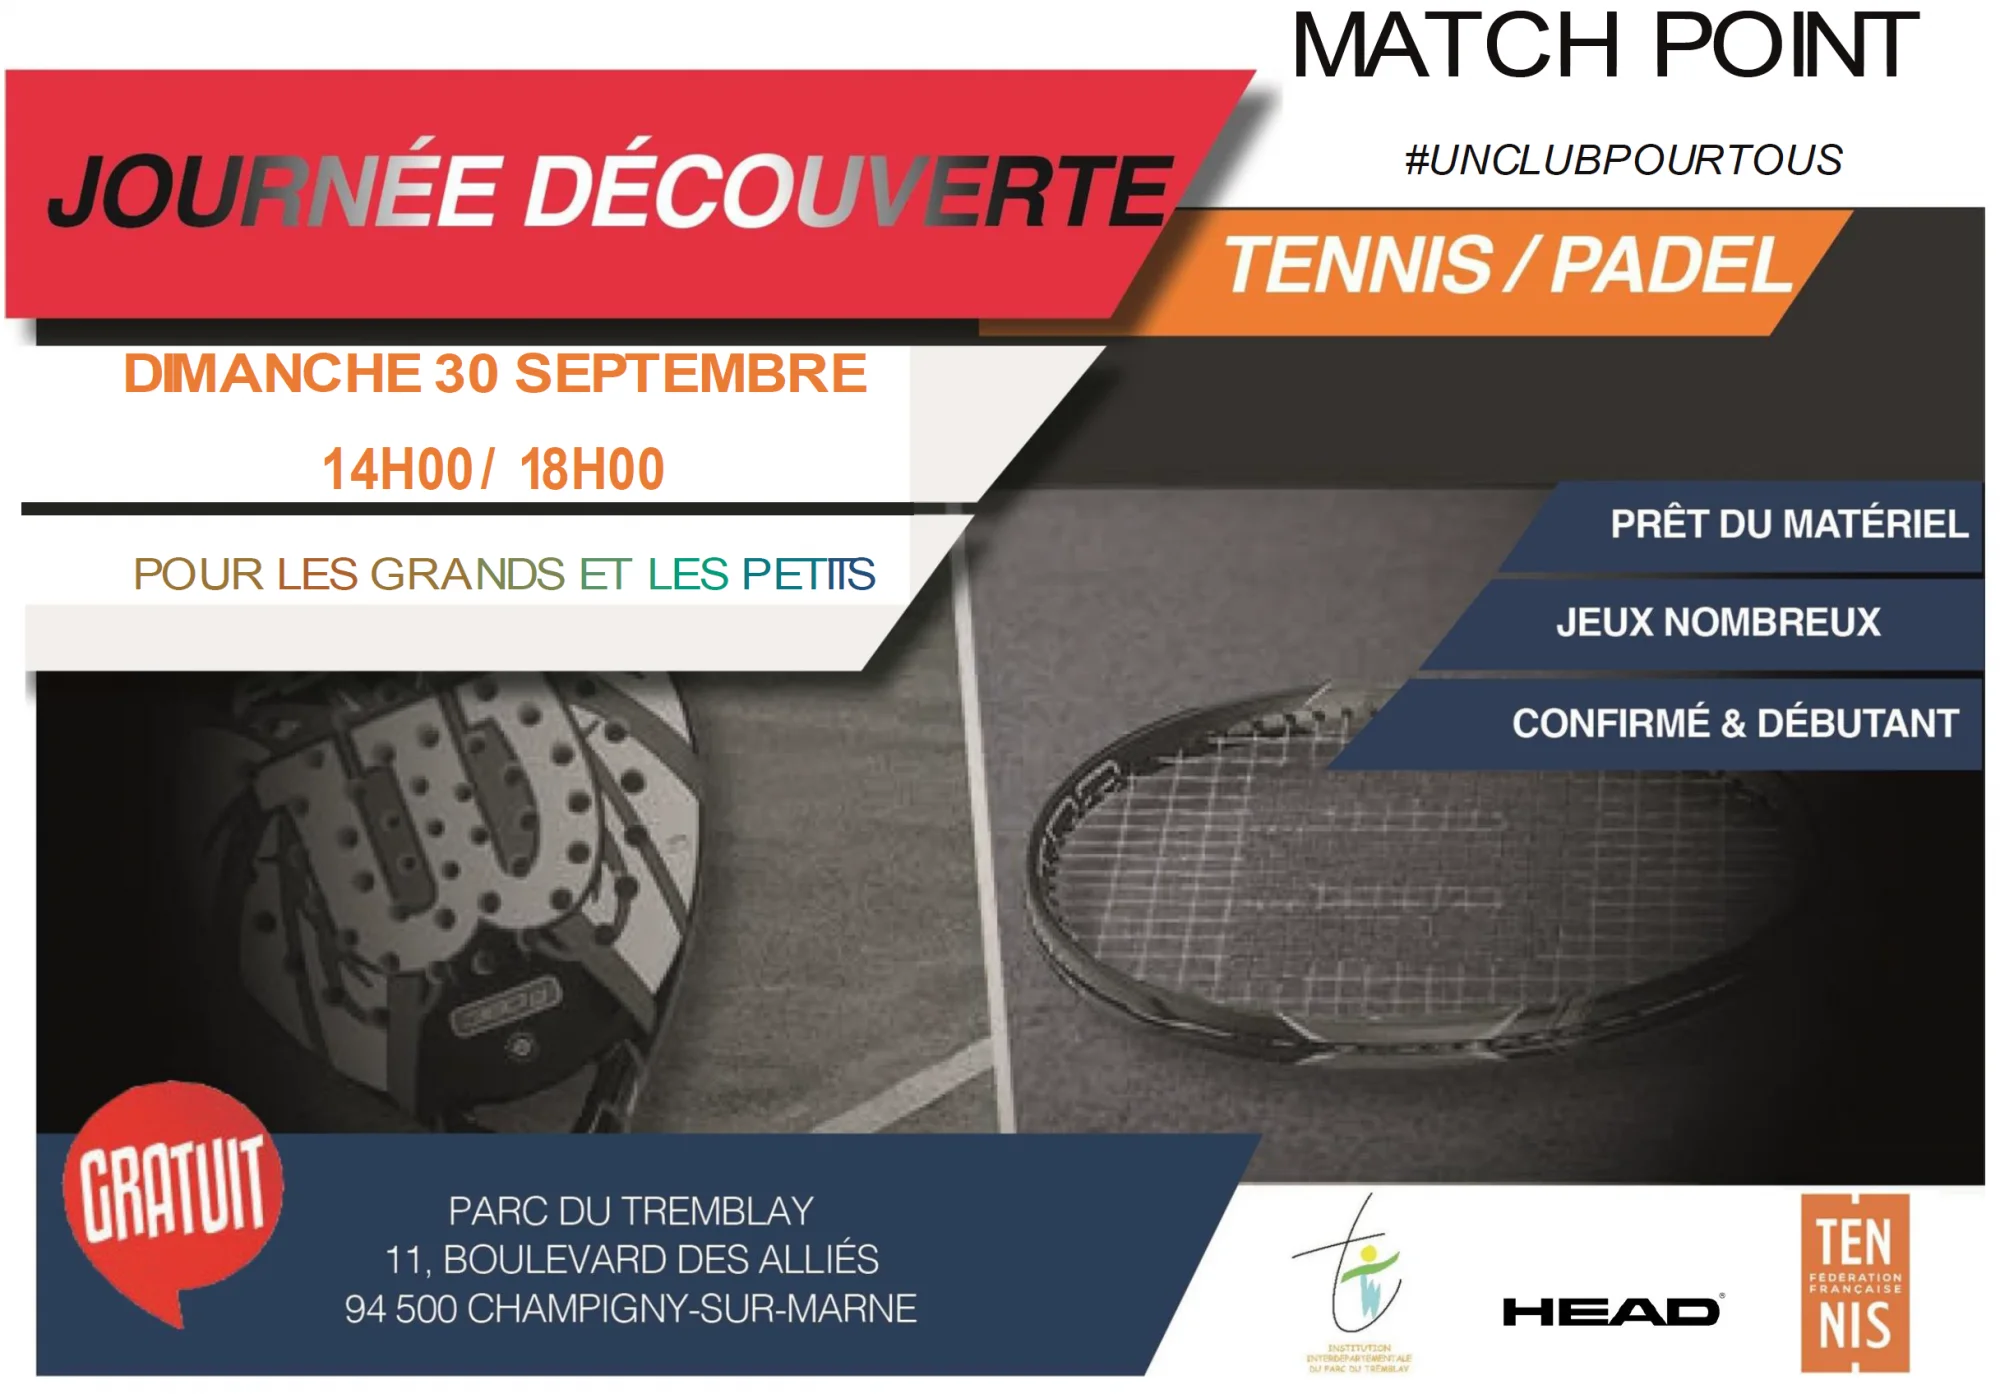 2nd day padel discovery at Parc du Tremblay